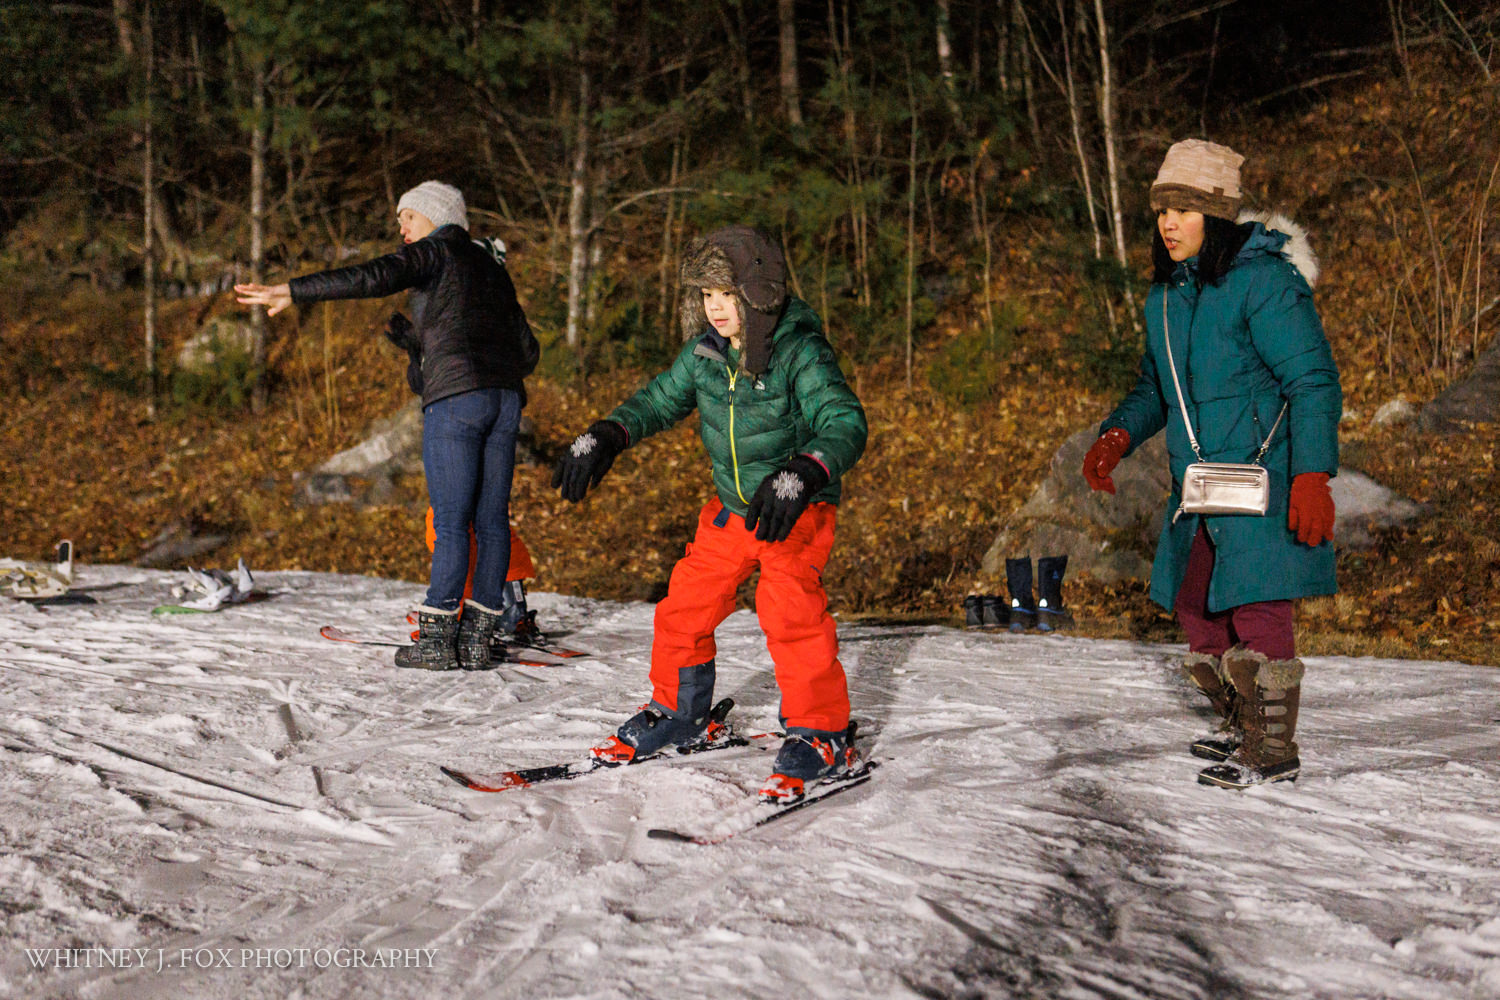 543 winter kids welcome to winter 2022 lost valley auburn maine documentary event photographer whitney j fox 3738 w